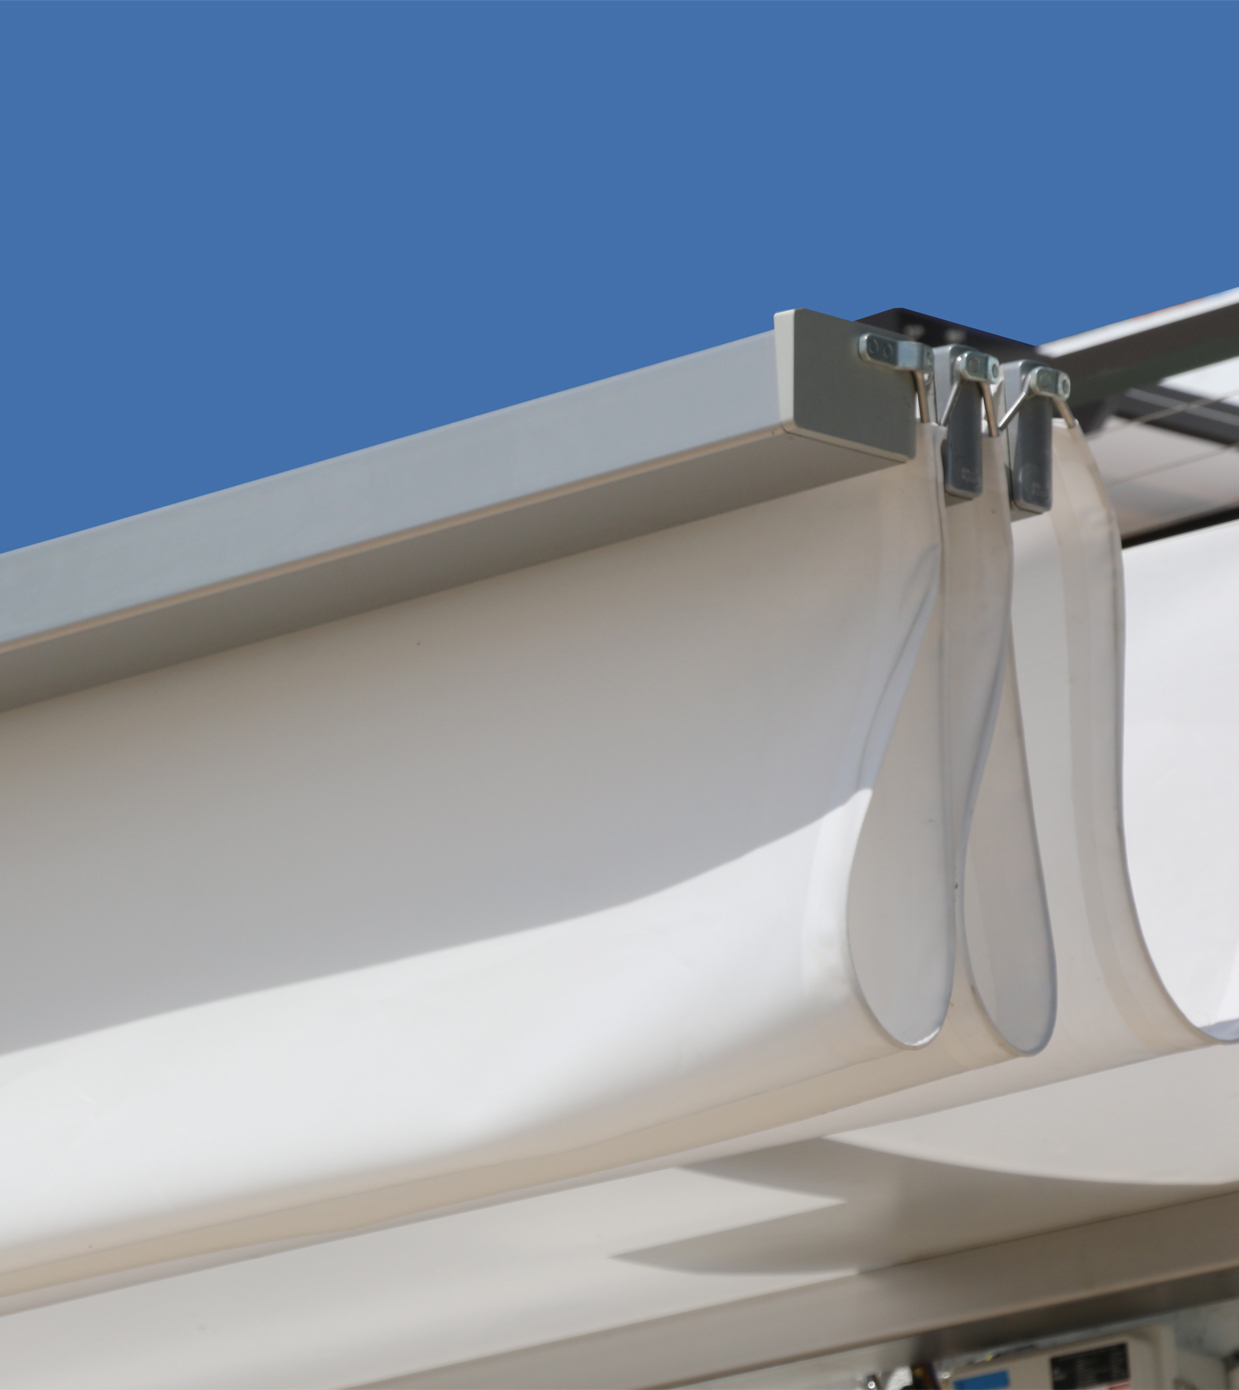 Leading Edge Beam - Retractable awning component